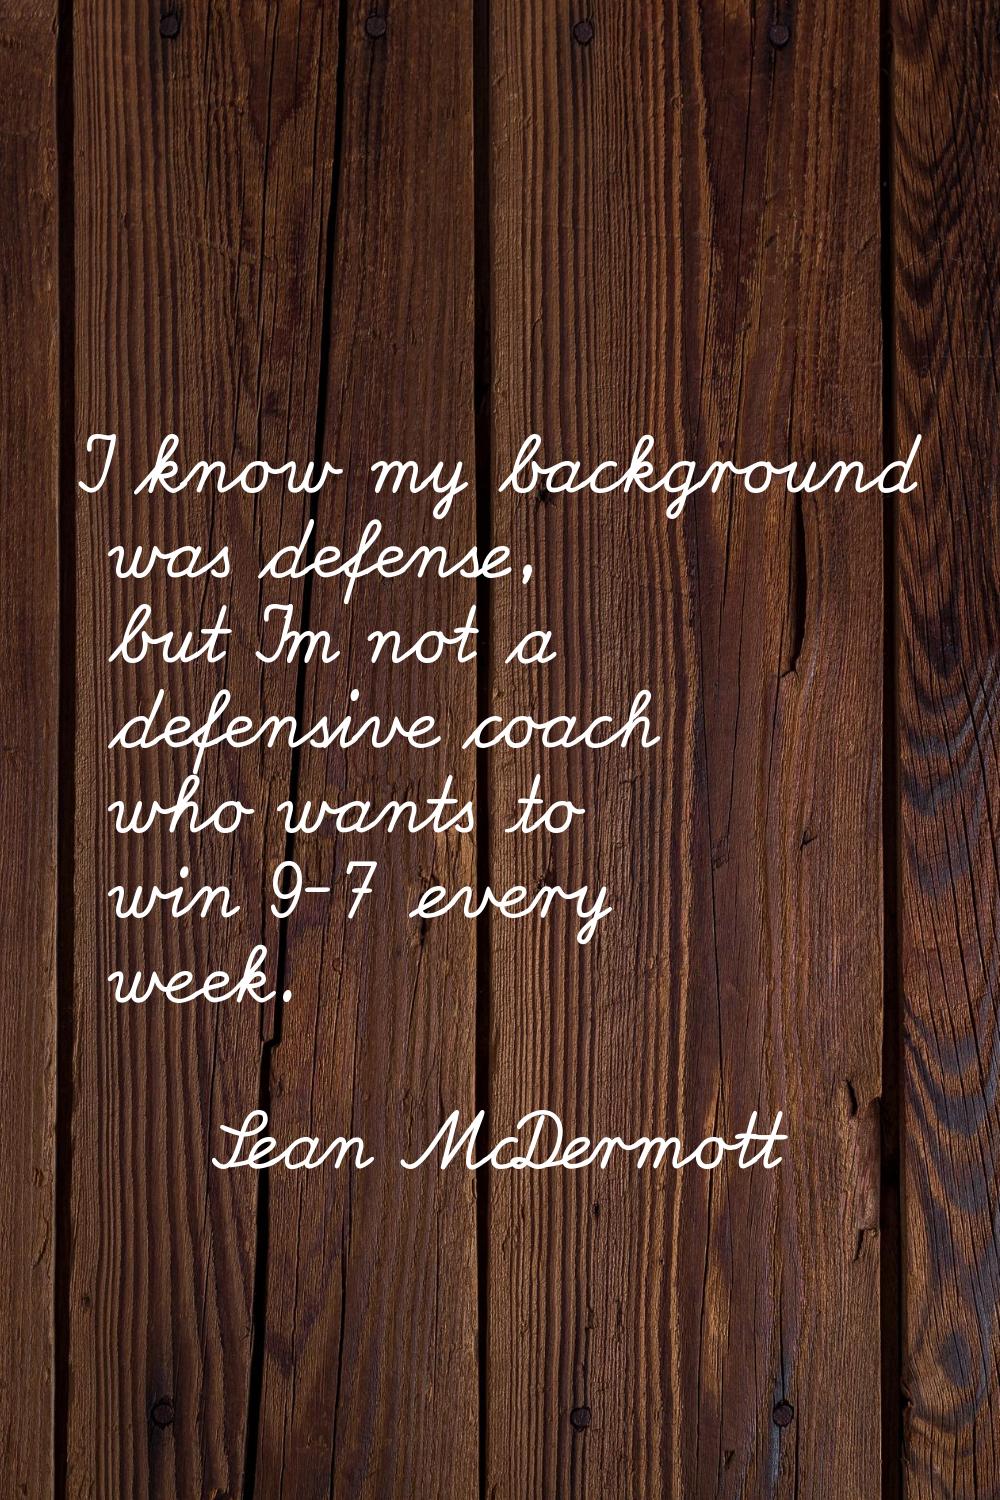 I know my background was defense, but I'm not a defensive coach who wants to win 9-7 every week.